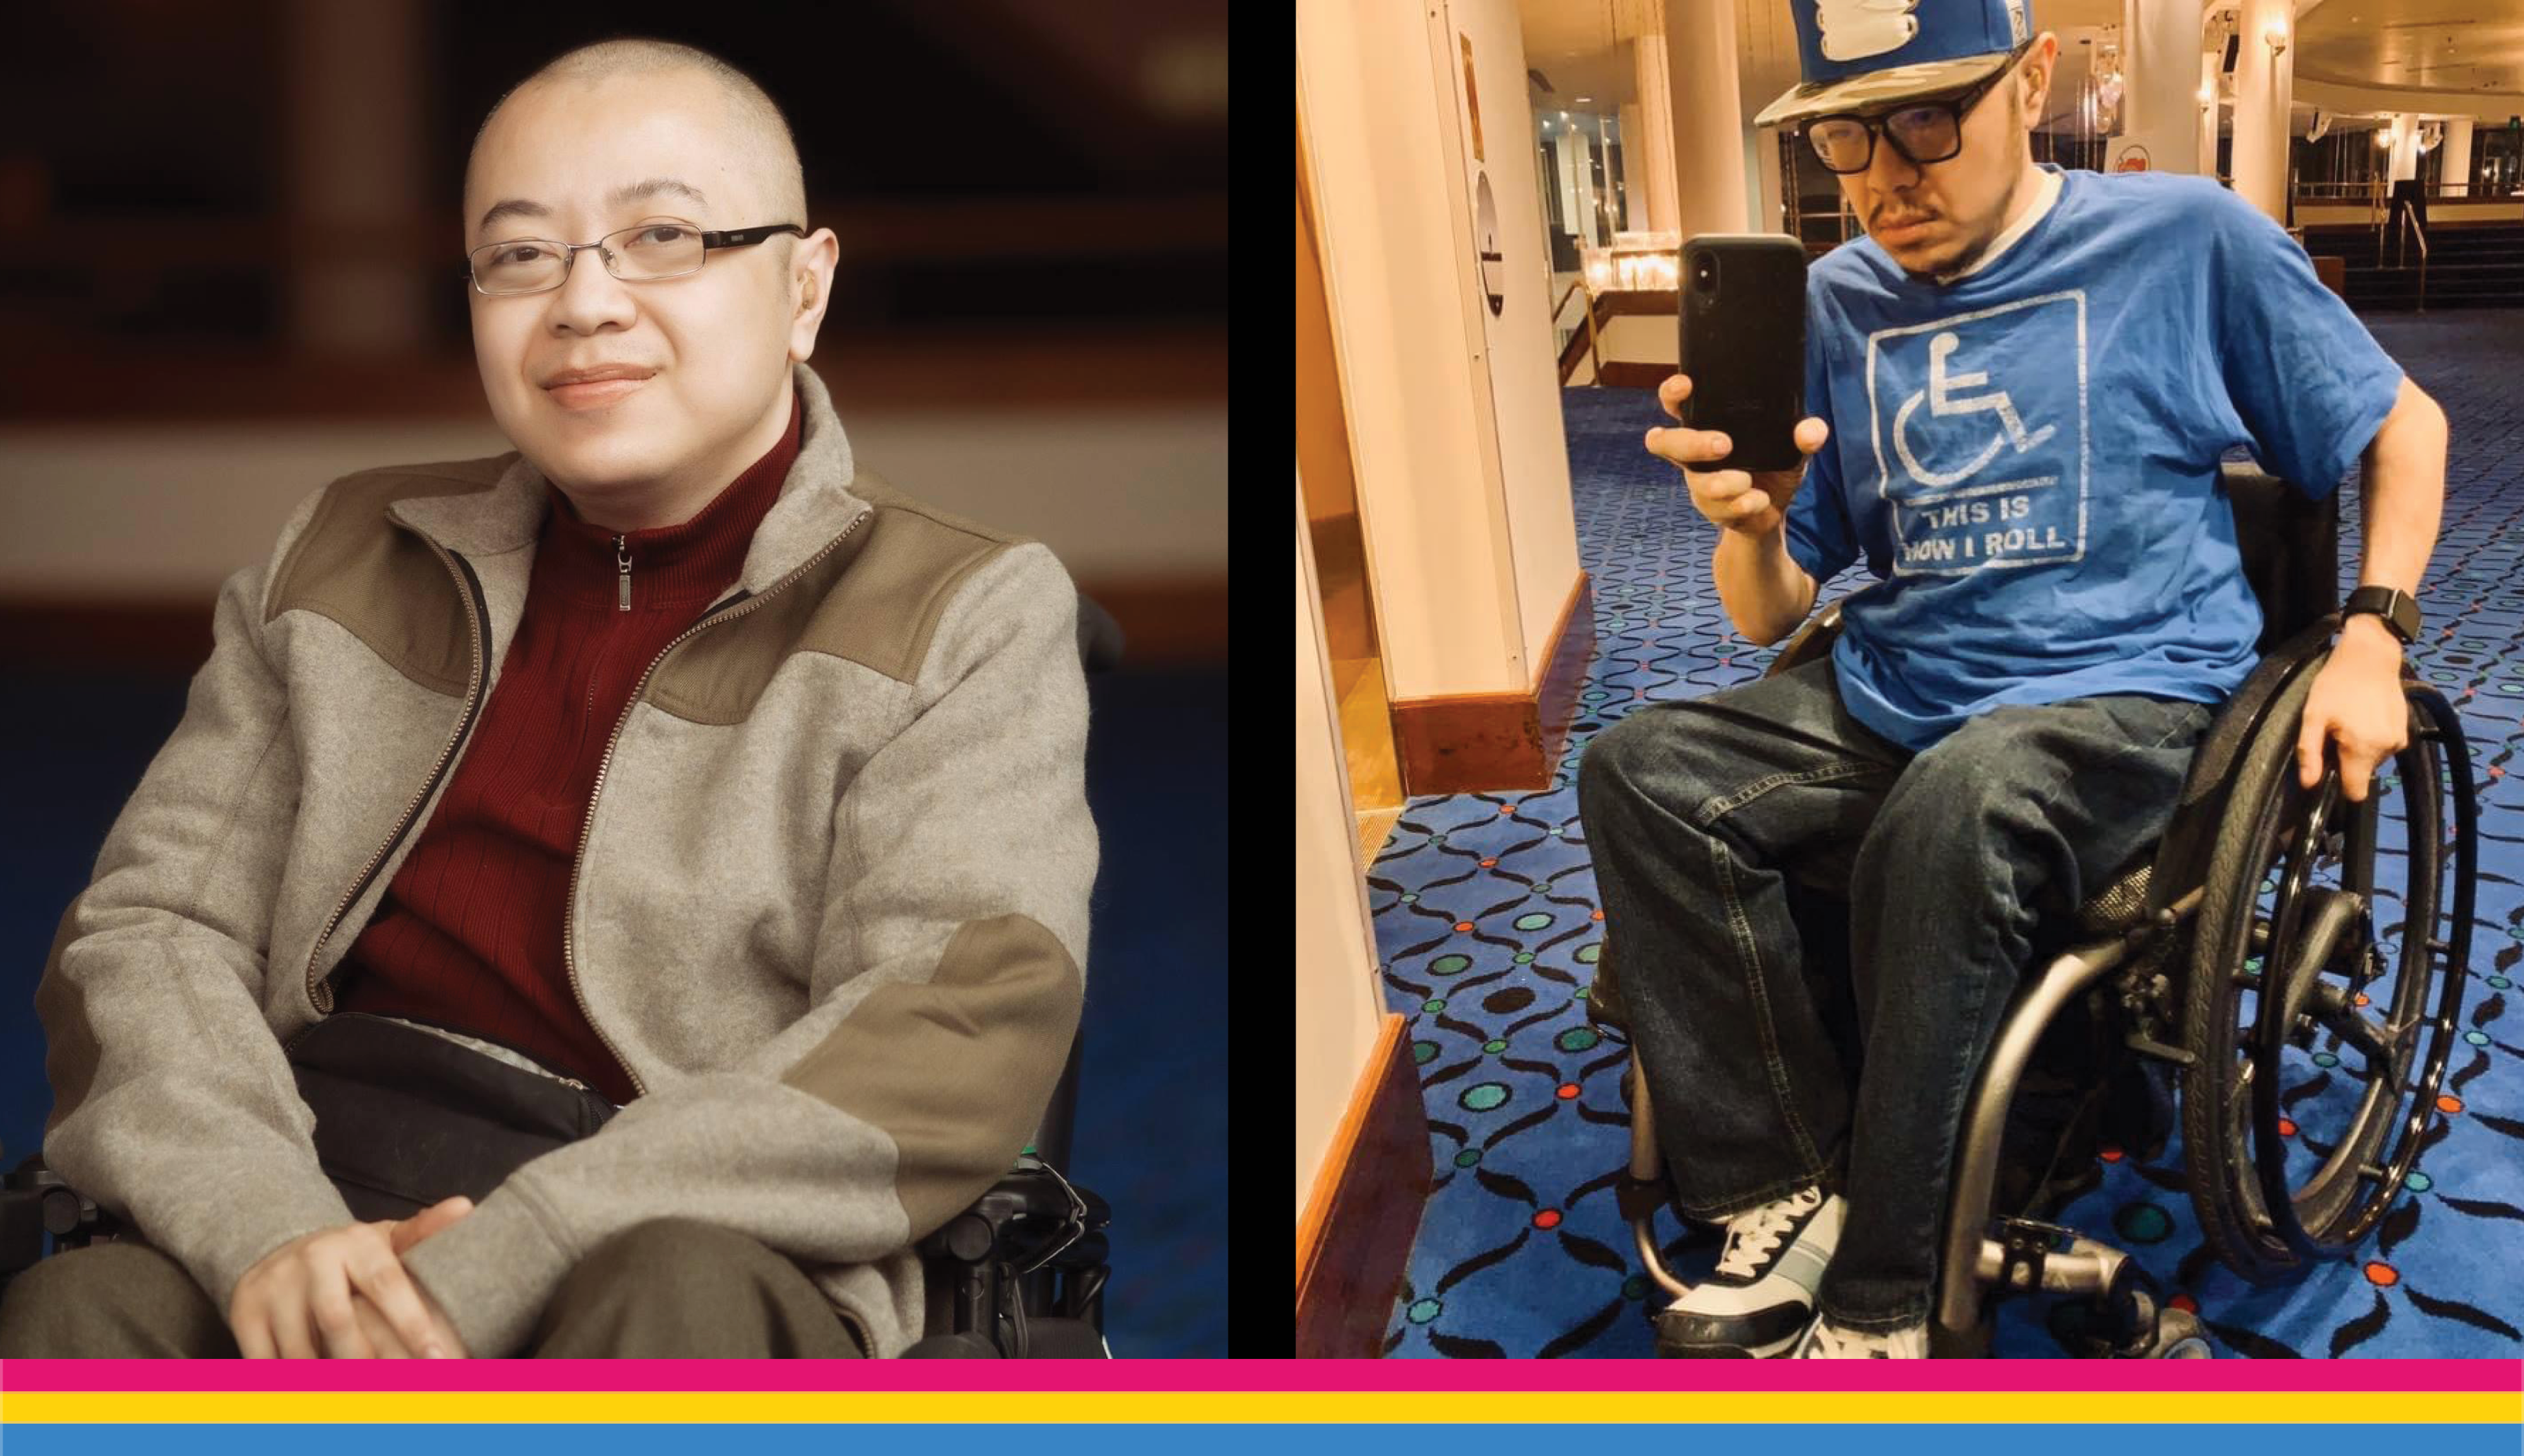 Two images arranged side-by-side in dyptich: To the left, Tommy, a bald bespeckled man, smiles slightly at the camera. To the right, Tommy takes a selfie of himself in his wheelchair wearing a "This is how I roll" t-shirt. 